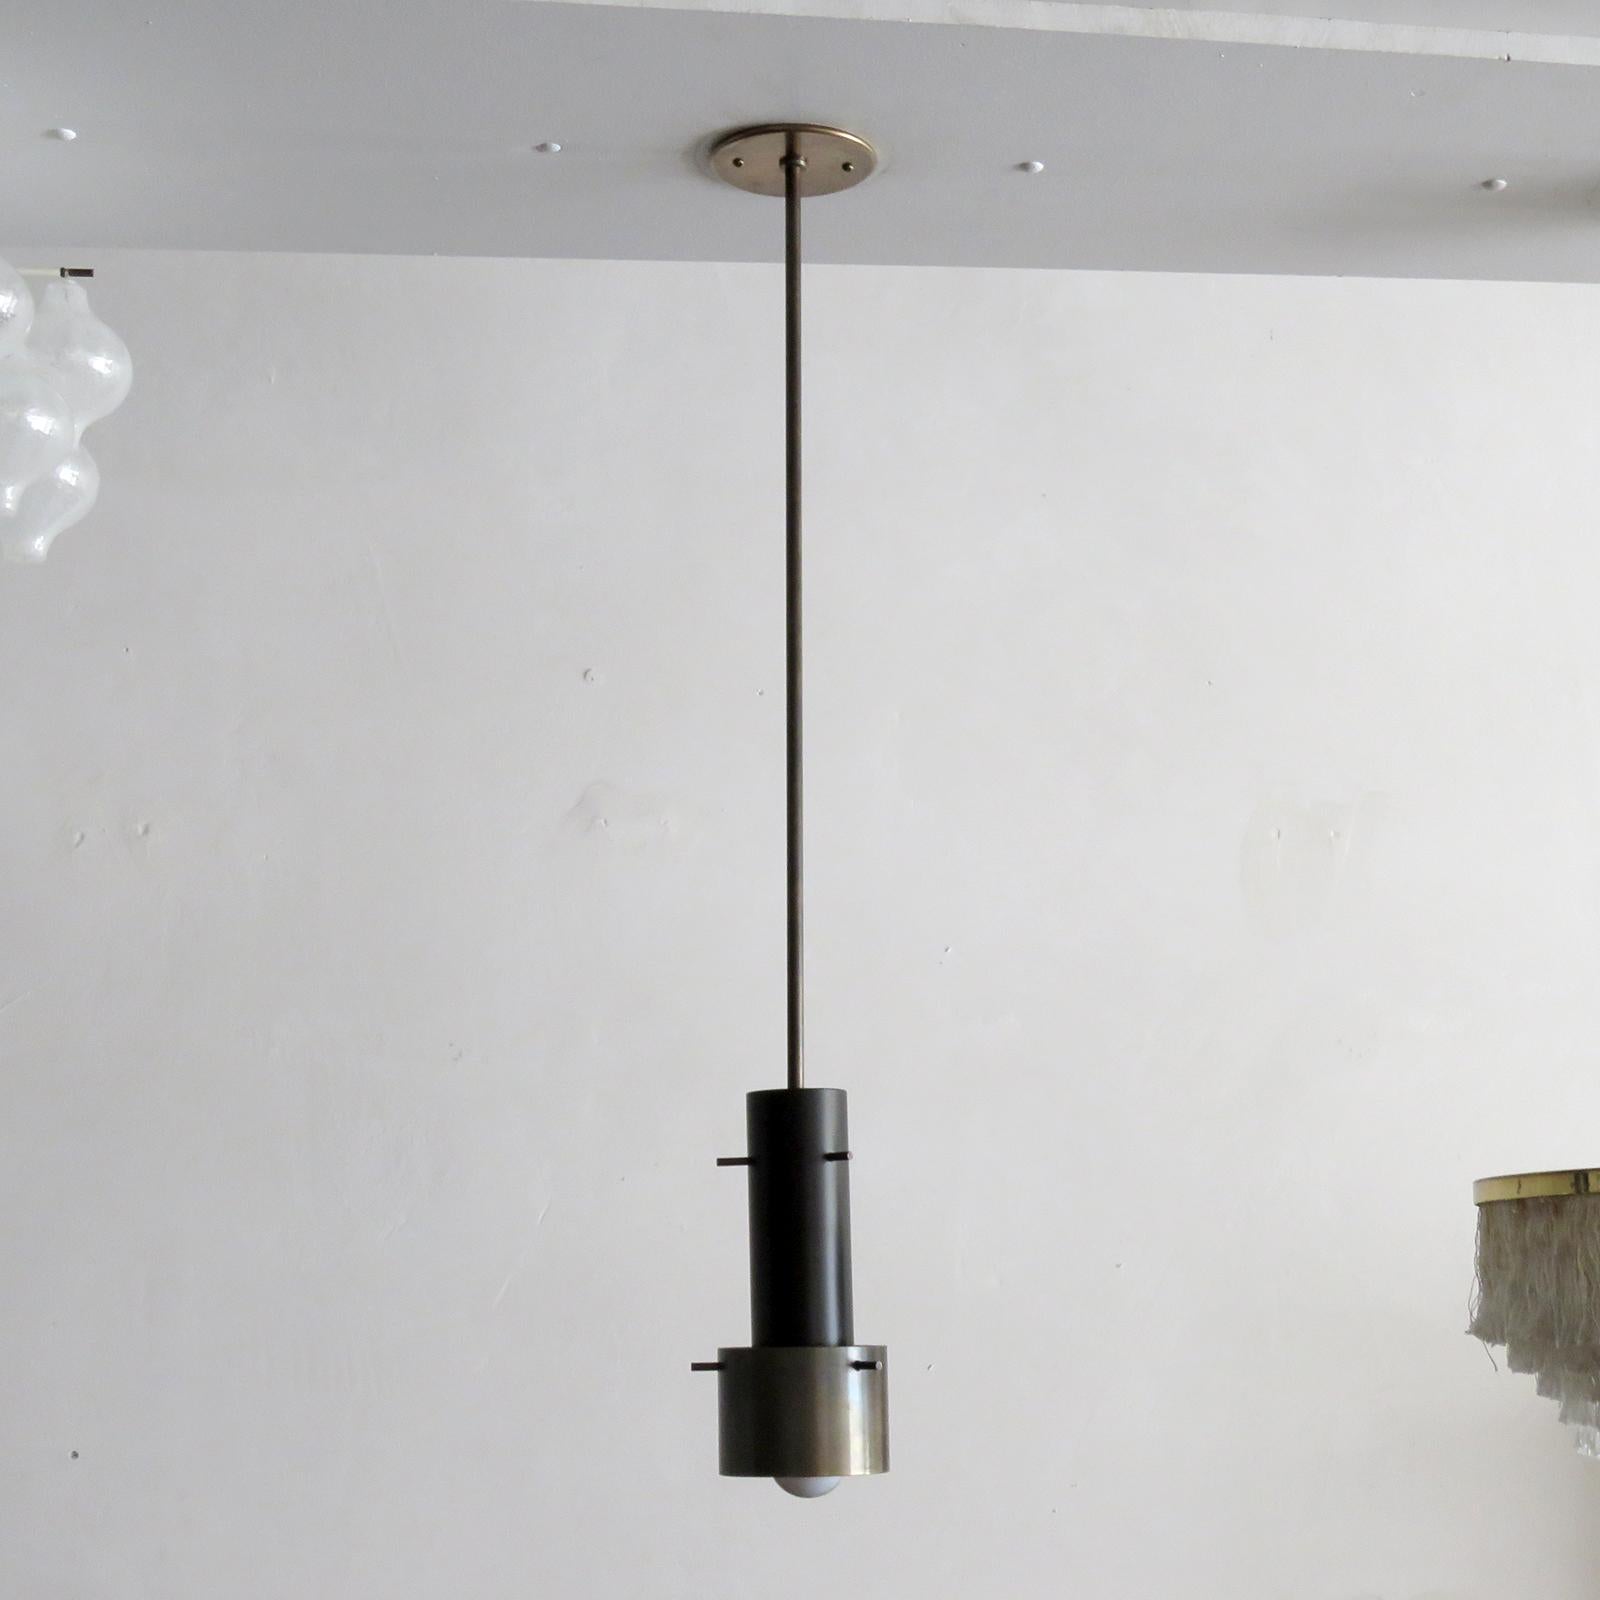 Wonderful Italian articulate pendant light in patinaed brass and enameled aluminum, wired for US standards or European standards (110v/240v), one E27 socket, max. Wattage 75w, bulb provided as a onetime courtesy.